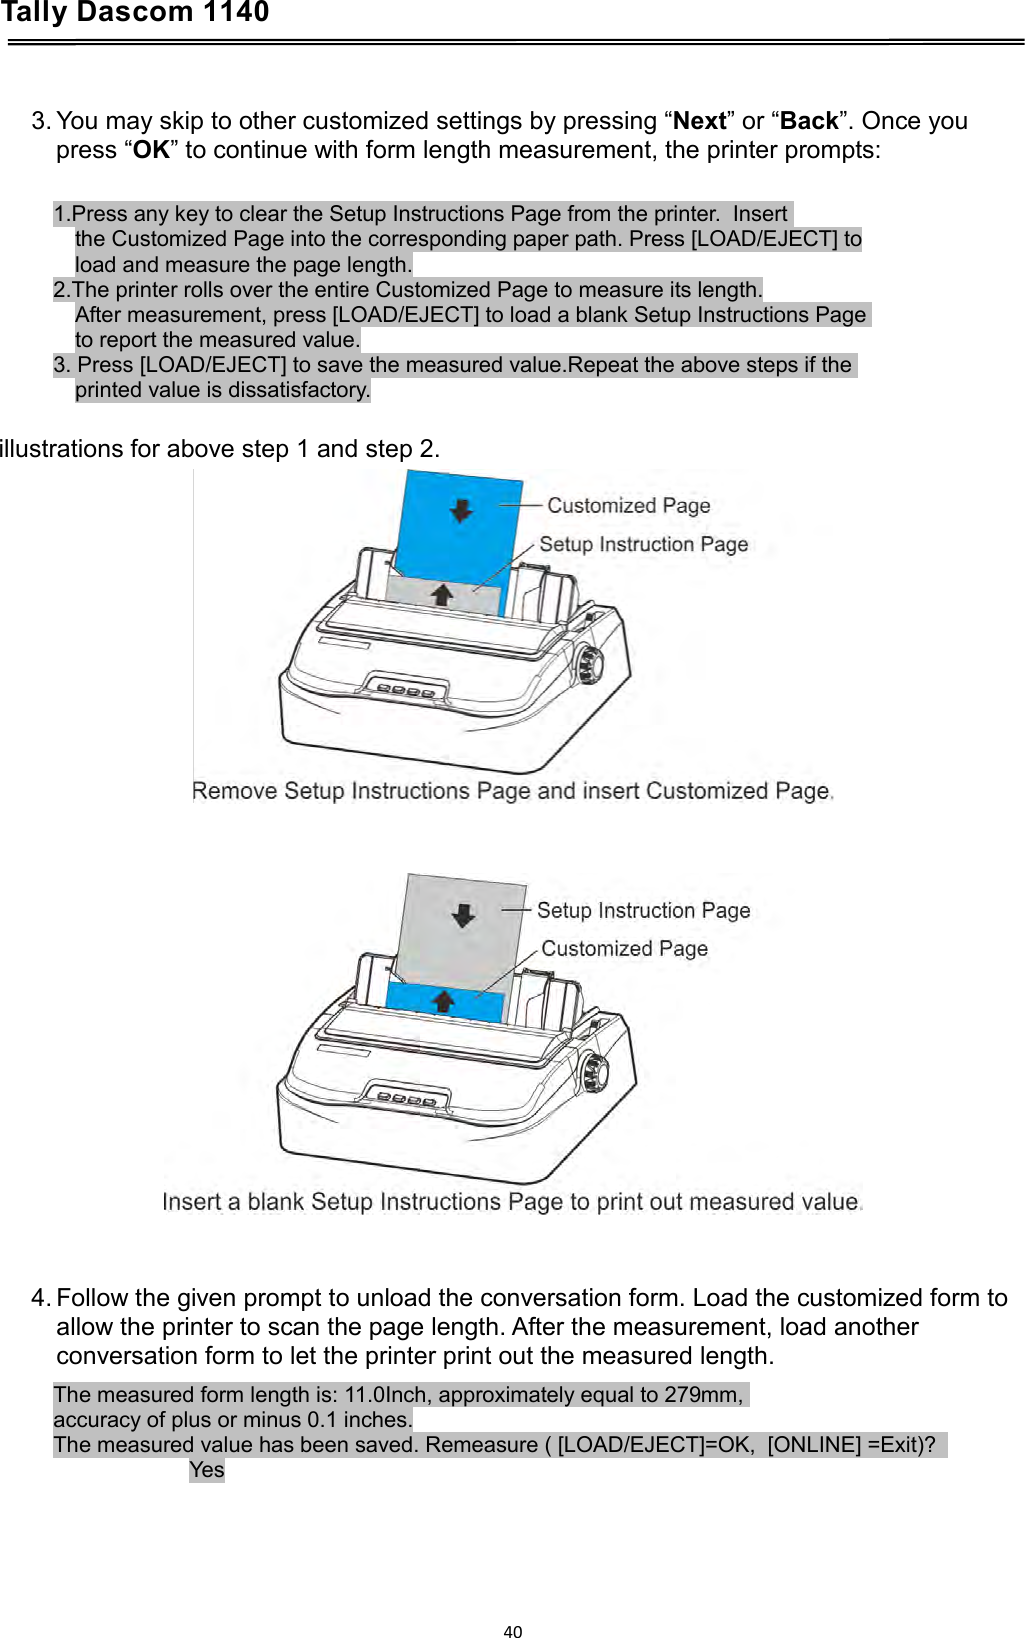 Tally Dascom 1140    3. You may skip to other customized settings by pressing “Next” or “Back”. Once you press “OK” to continue with form length measurement, the printer prompts:   1.Press any key to clear the Setup Instructions Page from the printer.  Insert  the Customized Page into the corresponding paper path. Press [LOAD/EJECT] to load and measure the page length. 2.The printer rolls over the entire Customized Page to measure its length. After measurement, press [LOAD/EJECT] to load a blank Setup Instructions Page  to report the measured value. 3. Press [LOAD/EJECT] to save the measured value.Repeat the above steps if the  printed value is dissatisfactory.  illustrations for above step 1 and step 2.        4. Follow the given prompt to unload the conversation form. Load the customized form to allow the printer to scan the page length. After the measurement, load another conversation form to let the printer print out the measured length. The measured form length is: 11.0Inch, approximately equal to 279mm,  accuracy of plus or minus 0.1 inches. The measured value has been saved. Remeasure ( [LOAD/EJECT]=OK,  [ONLINE] =Exit)?   Yes     40  